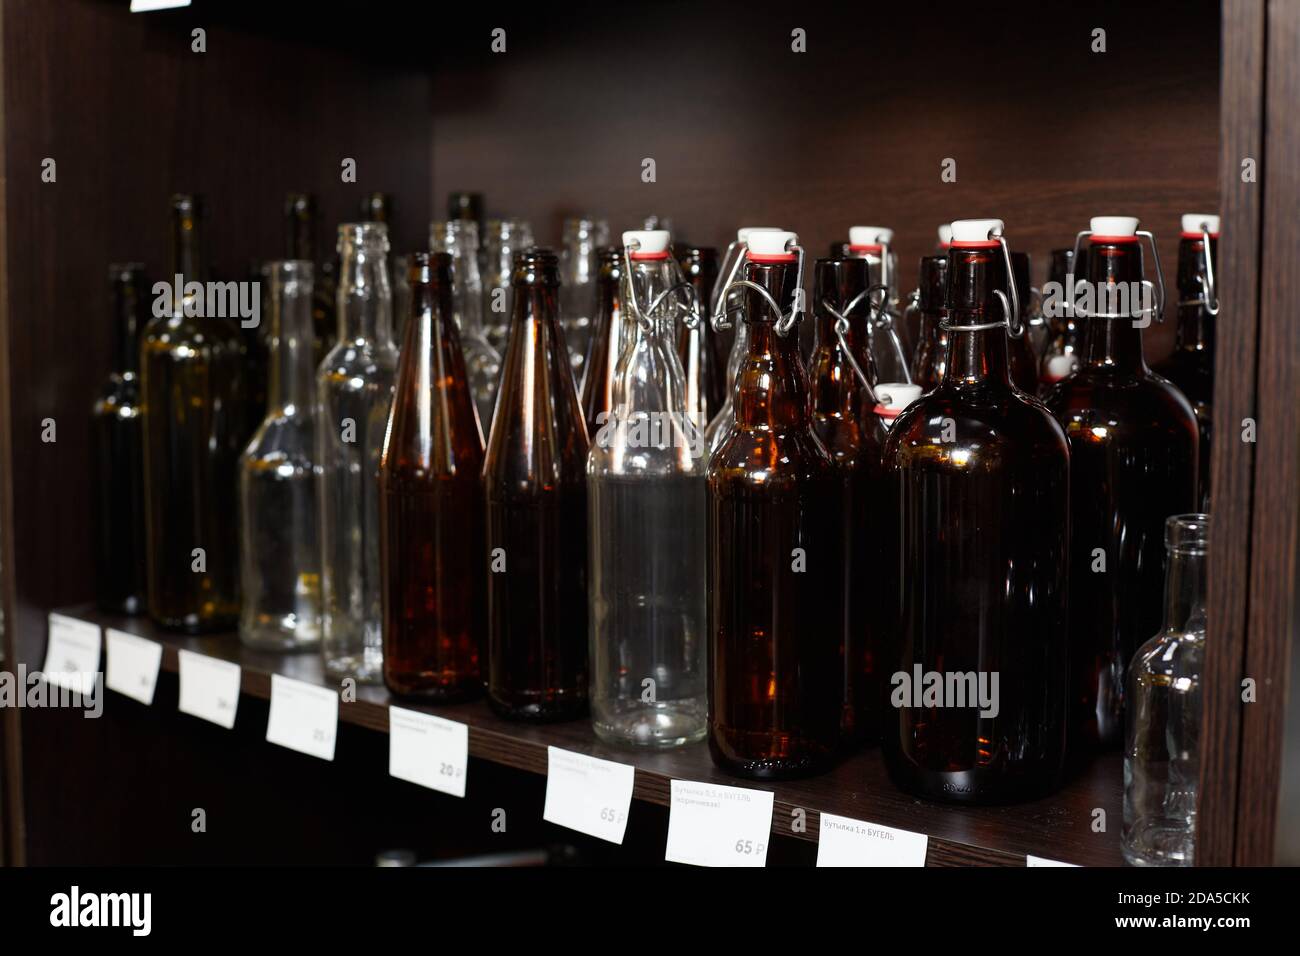 display case with empty glass bottles Stock Photo